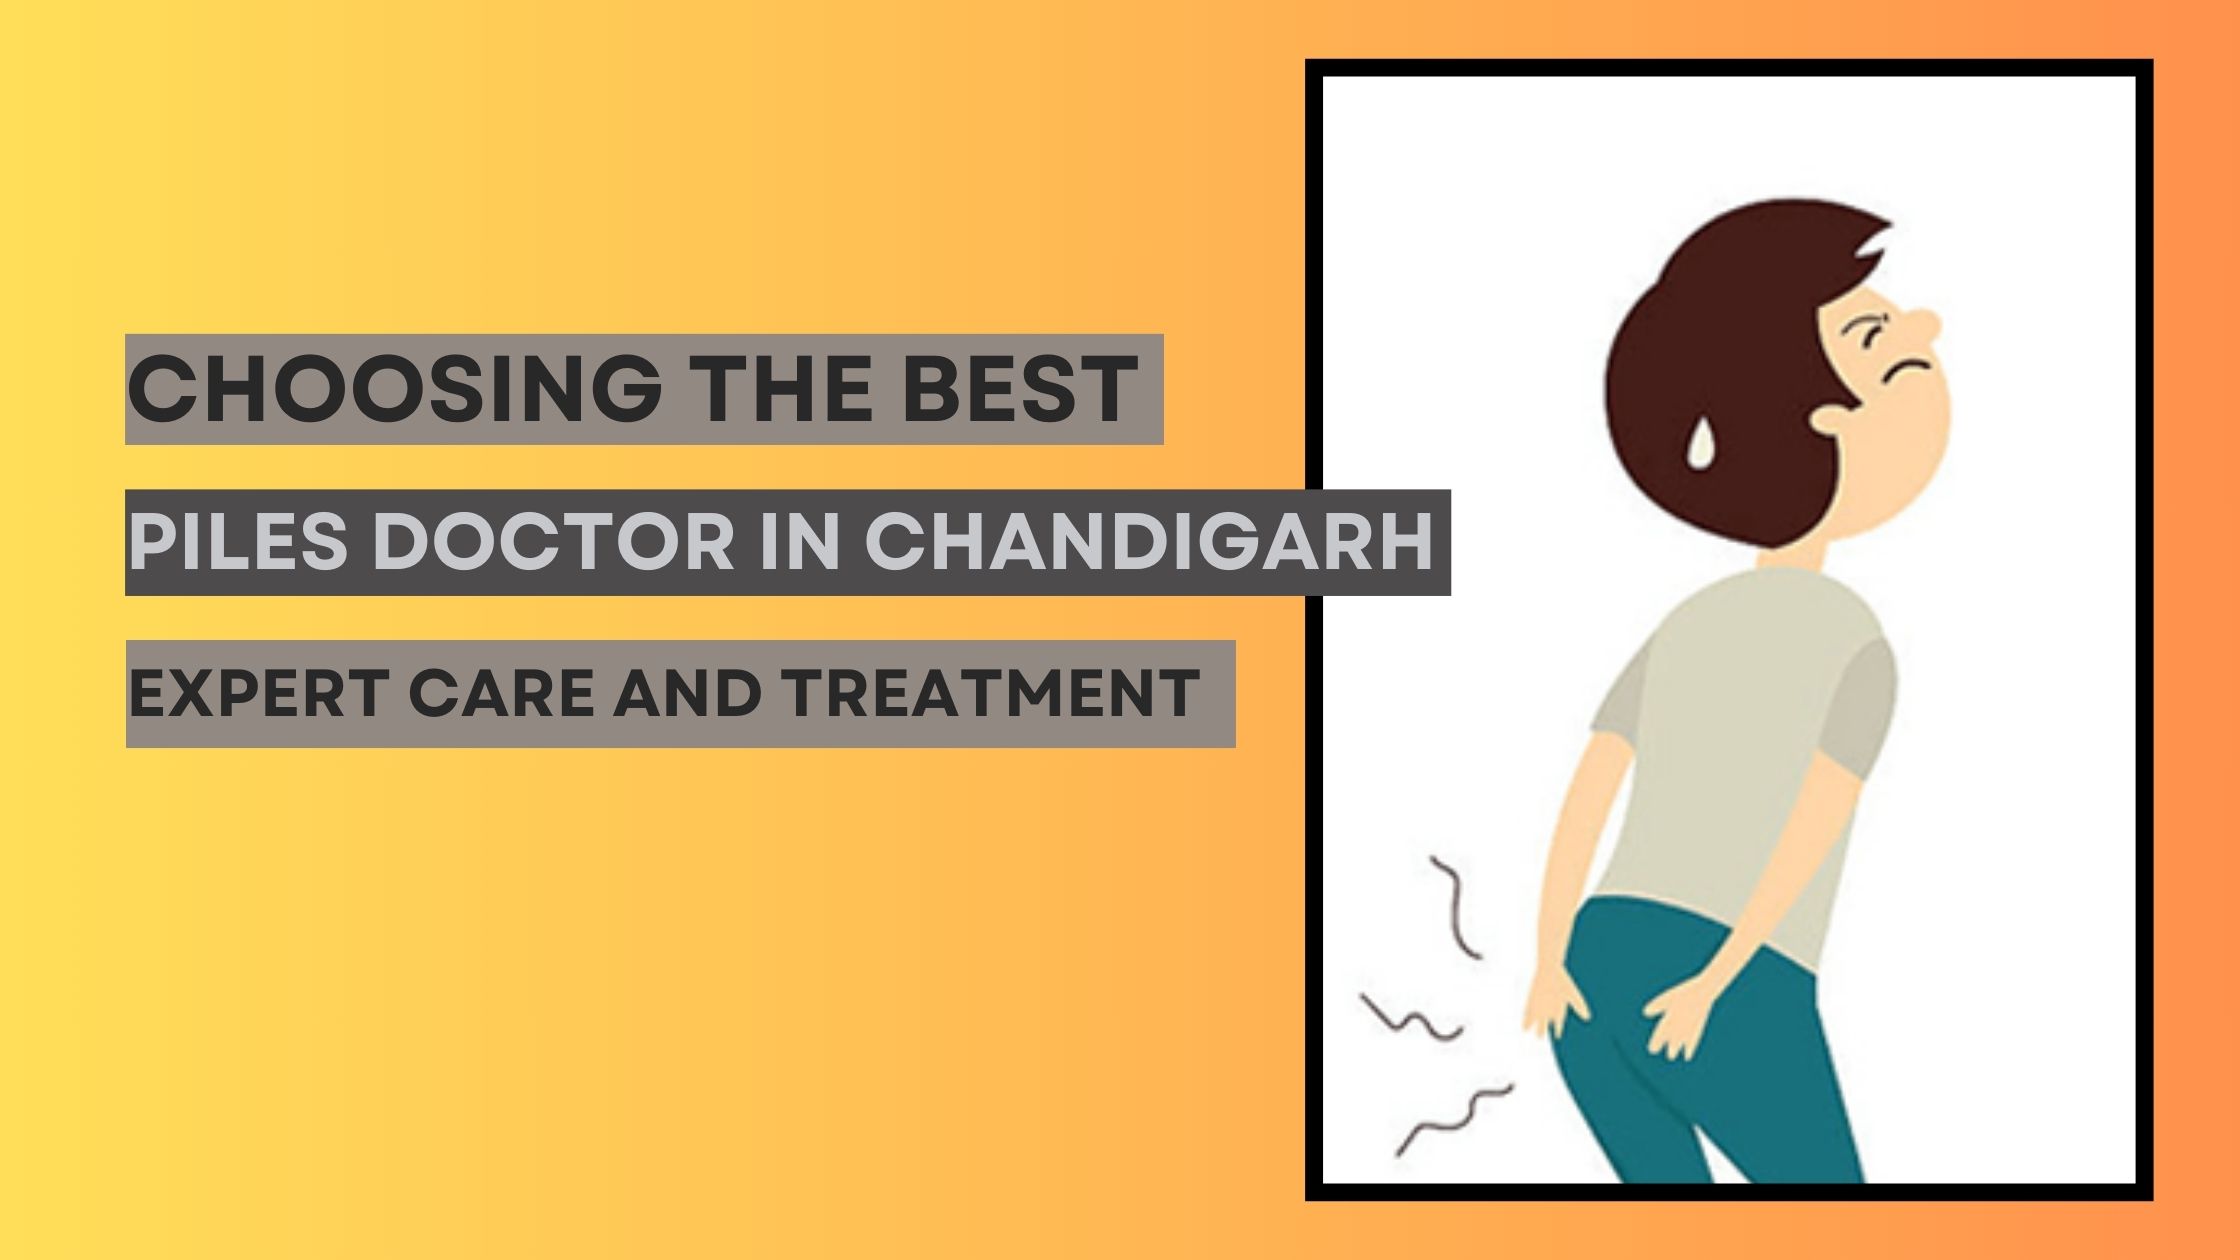 Choosing the Best Piles Doctor in Chandigarh: Expert Care and Treatment